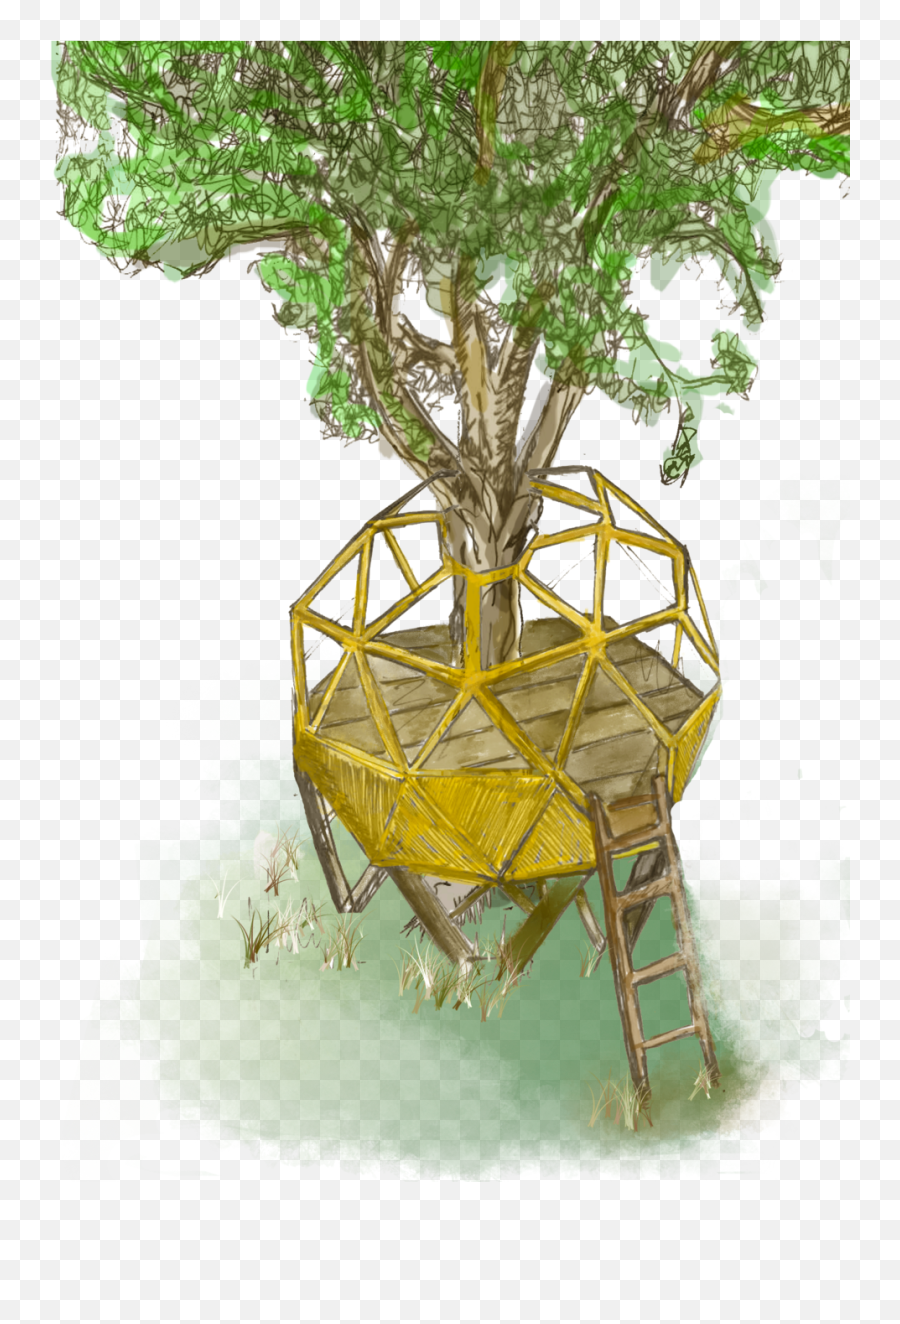 Download Treehouse Png Image With No - Tree House,Treehouse Png